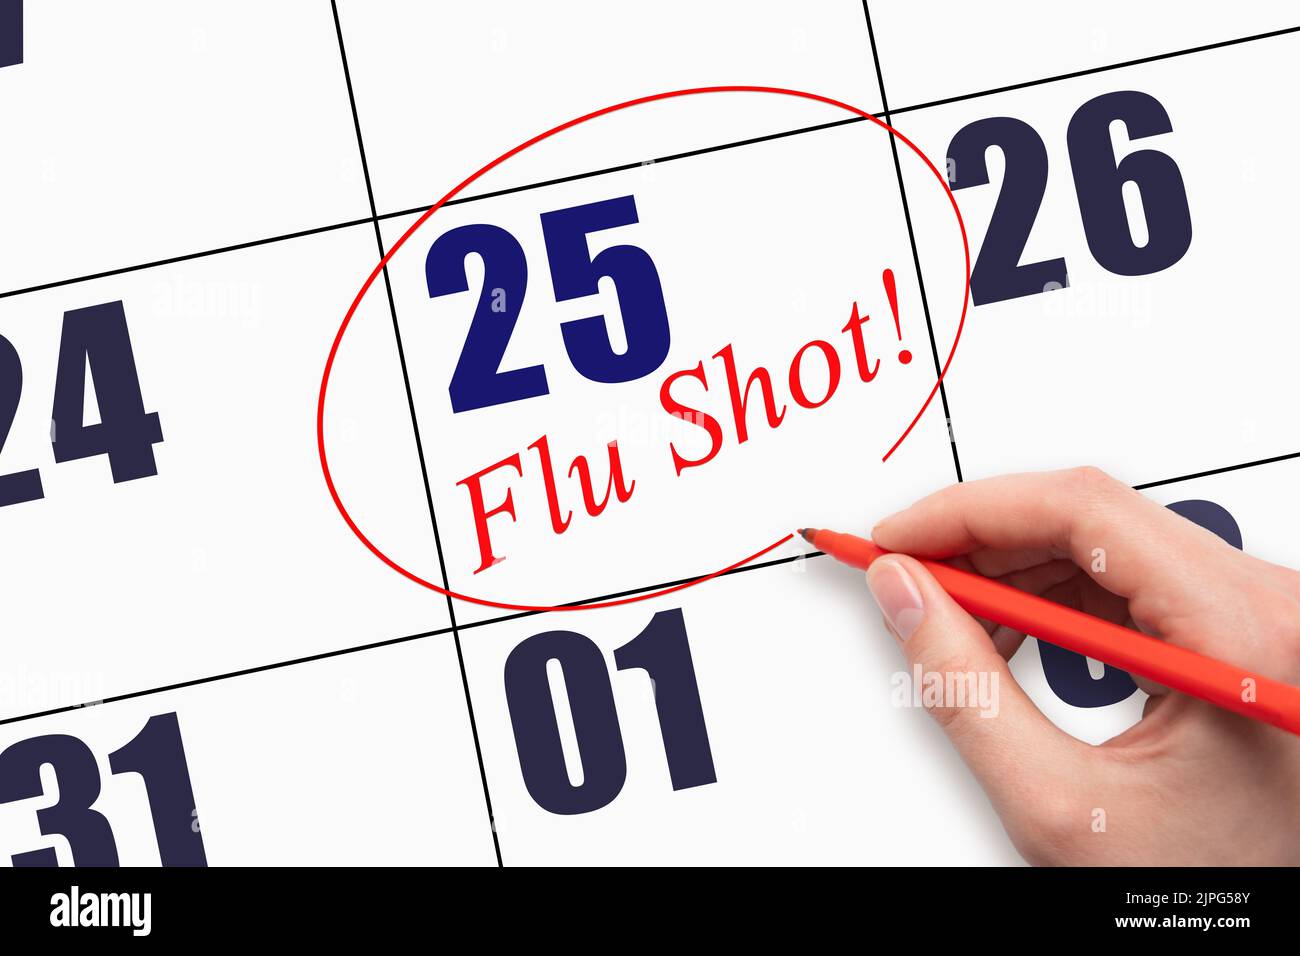 25th day of the month.  Hand writing text FLU SHOT and circling the calendar date. Mark the date on the day planner to have a flu shot. Healthcare Med Stock Photo